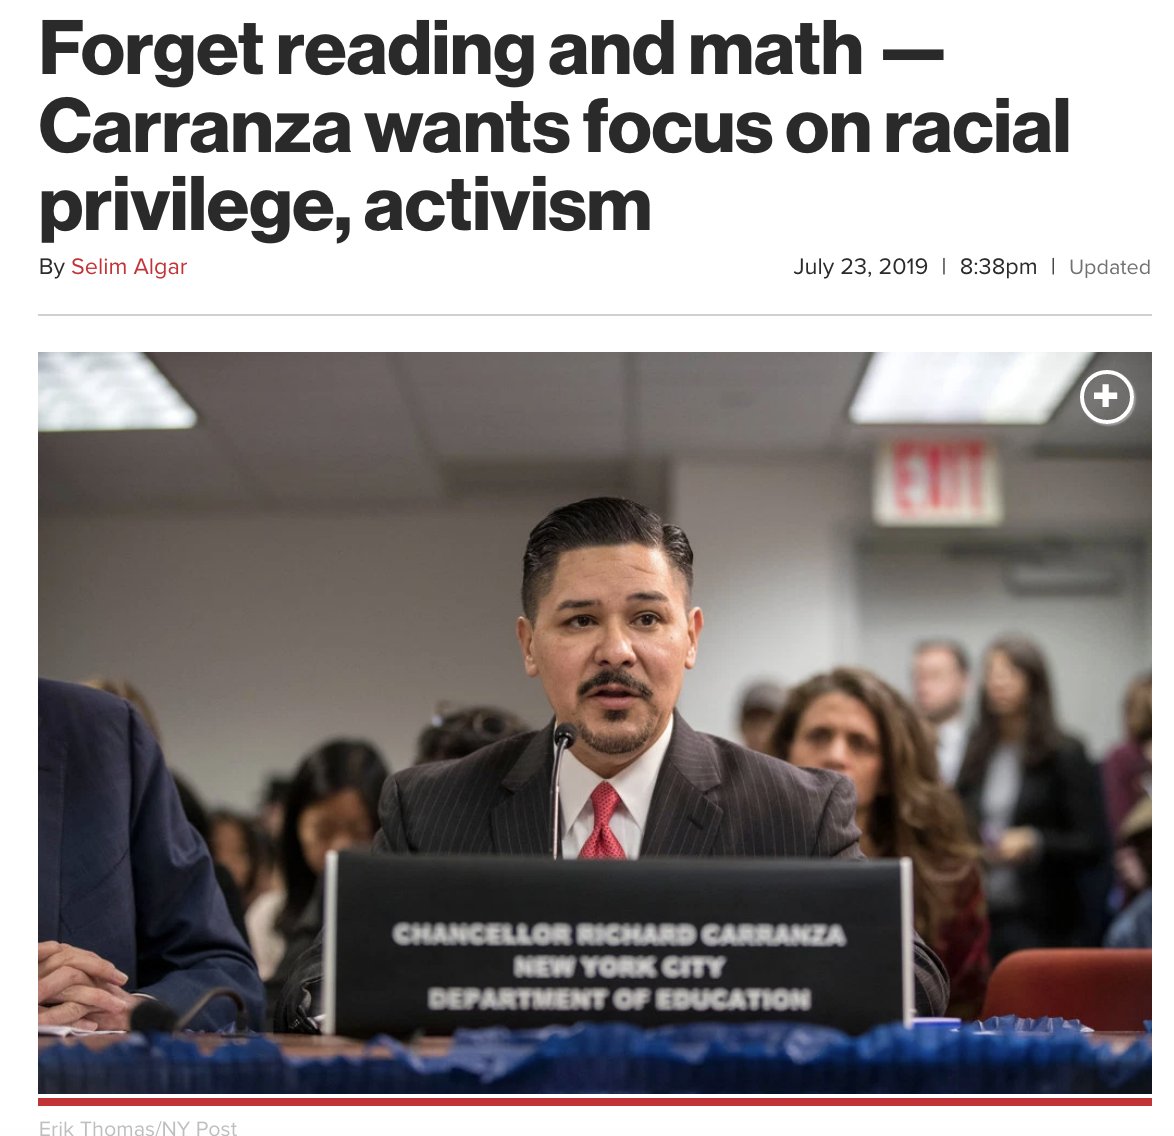 PAT accused city leaders of "inverse discrimination" and "educational dictatorship."PLACE leaders have been unrelenting in accusing Chancellor Carranza of racism for his efforts to integrate schools and expand culturally responsive education & implicit bias training. (4/8)